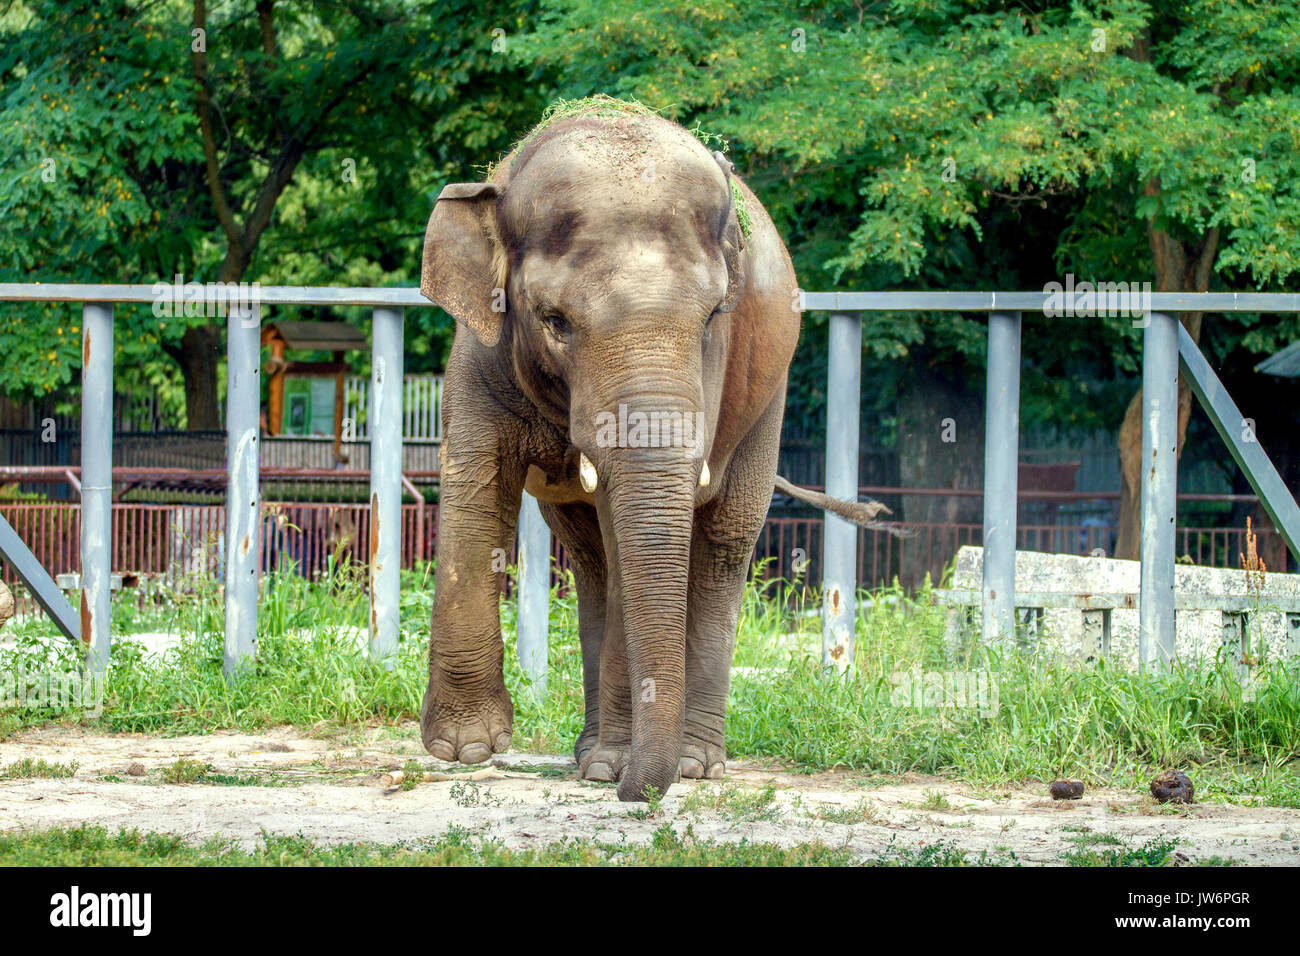 And the image of a large elephant walks in the enclosure of the zoo Stock Photo